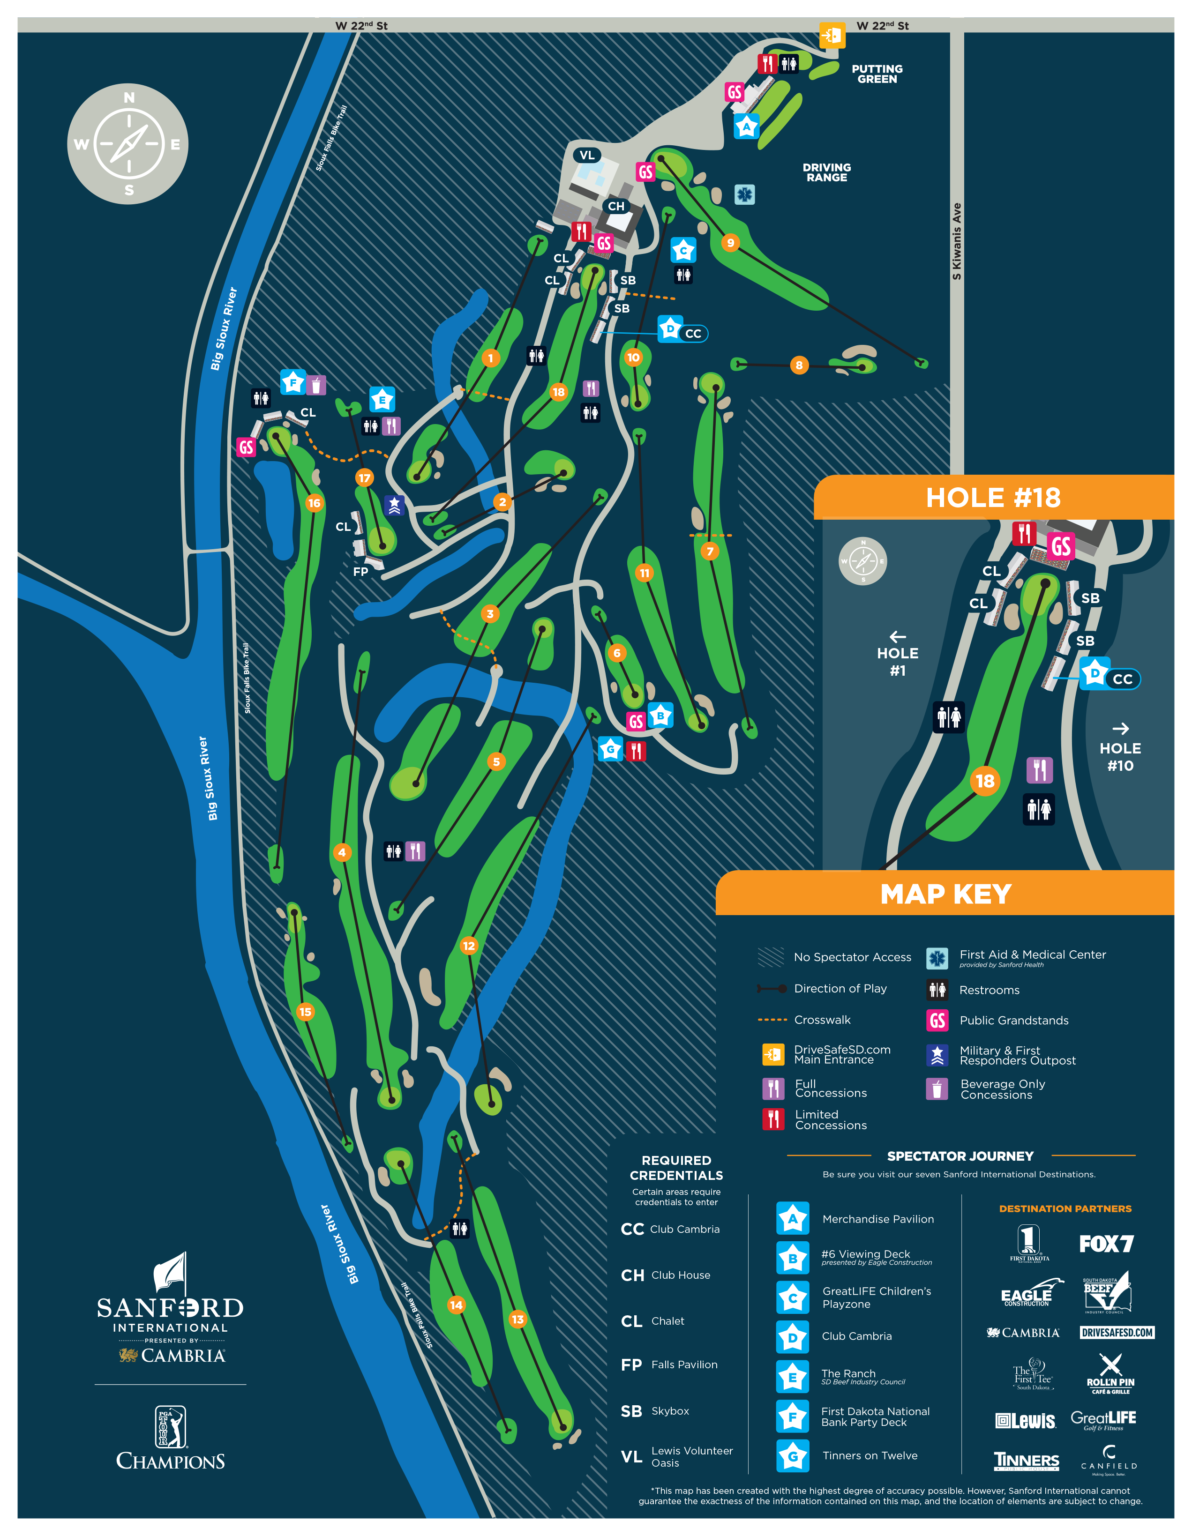 Sanford International Course and Event Map